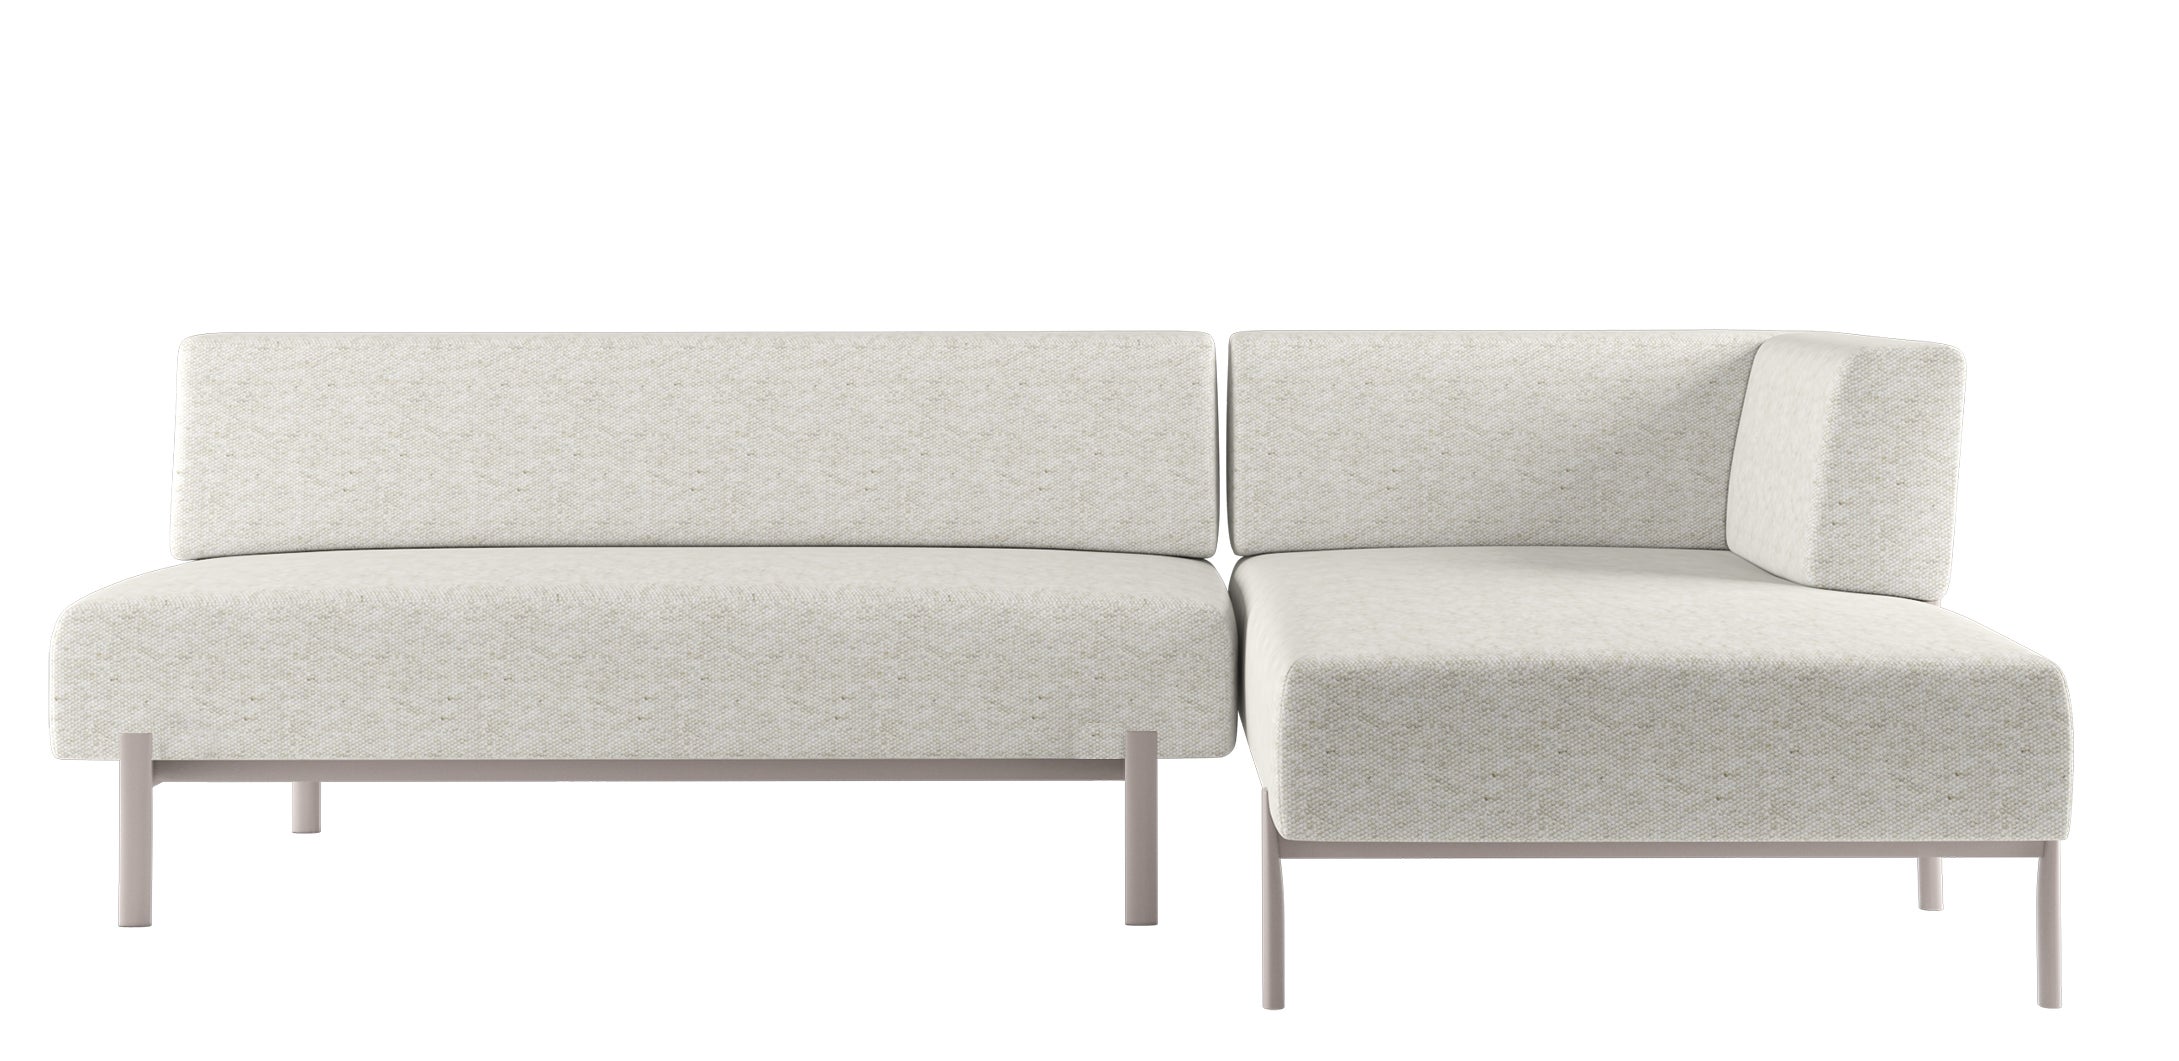 Alias T04+T06 Ten Outdoor Sofa Set in White with Sand Lacquered Aluminum Frame